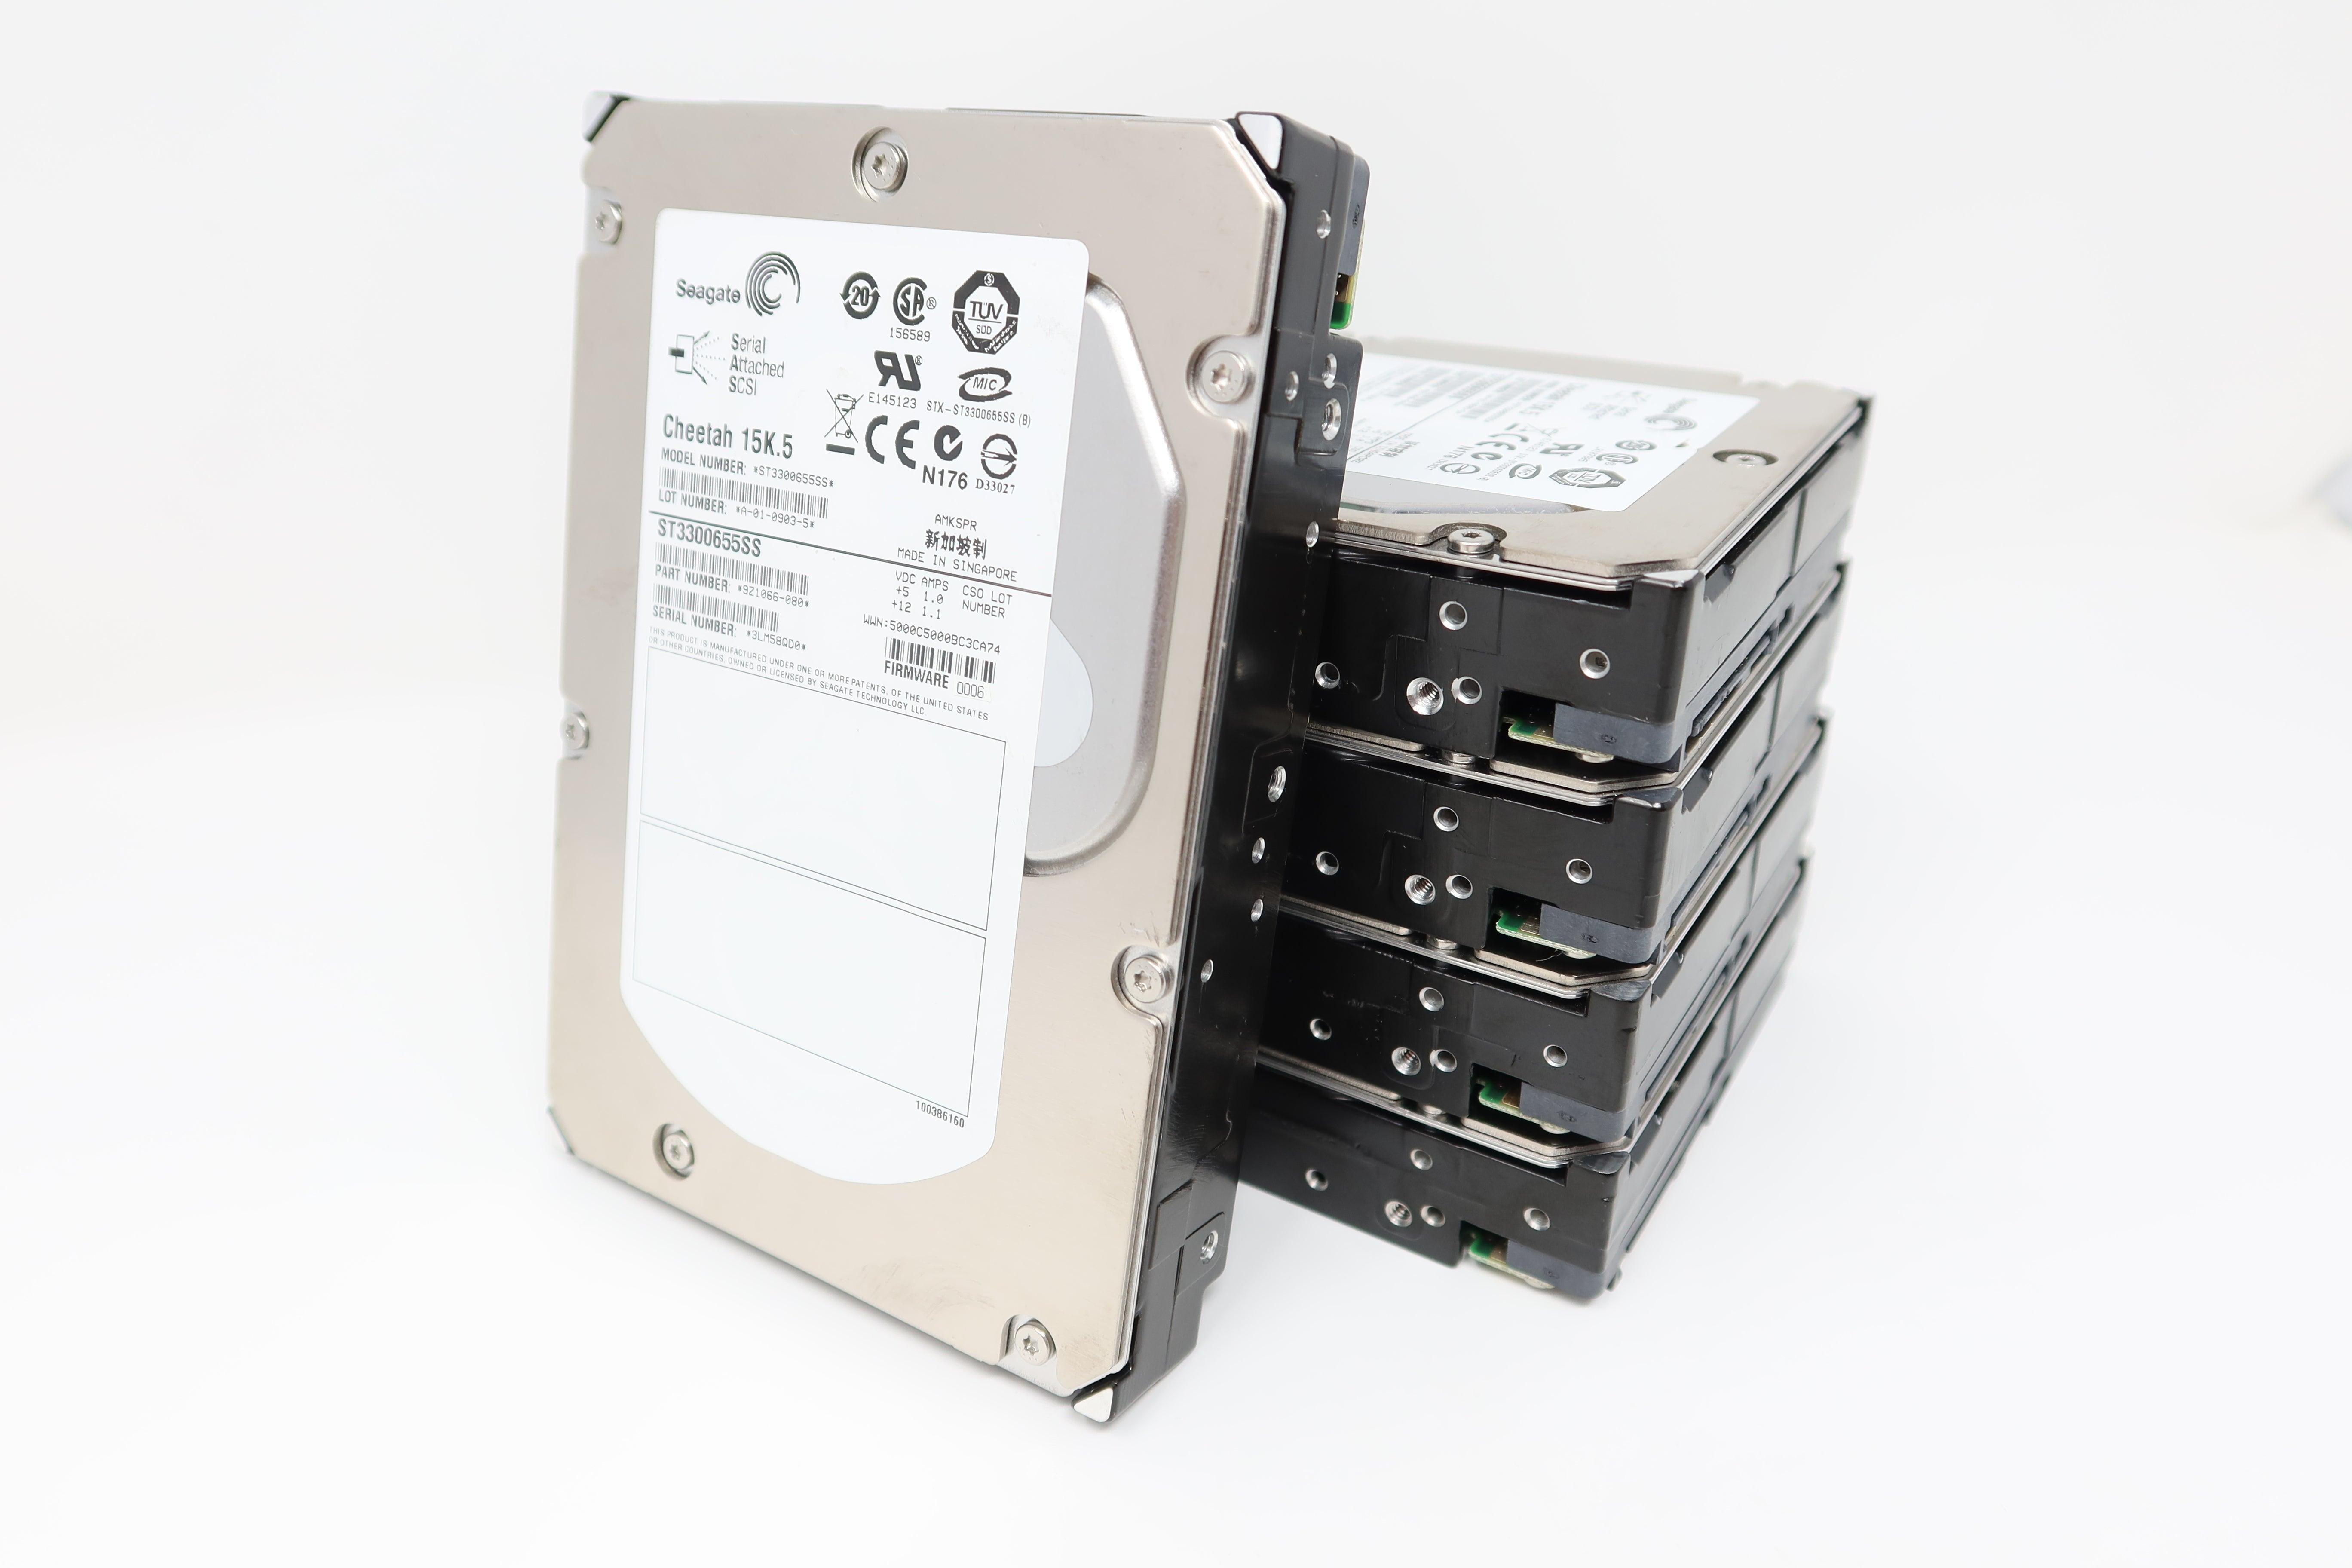 Seagate ST3300655SS 300GB 15K SAS 3.5IN (Lot of 5) Drives